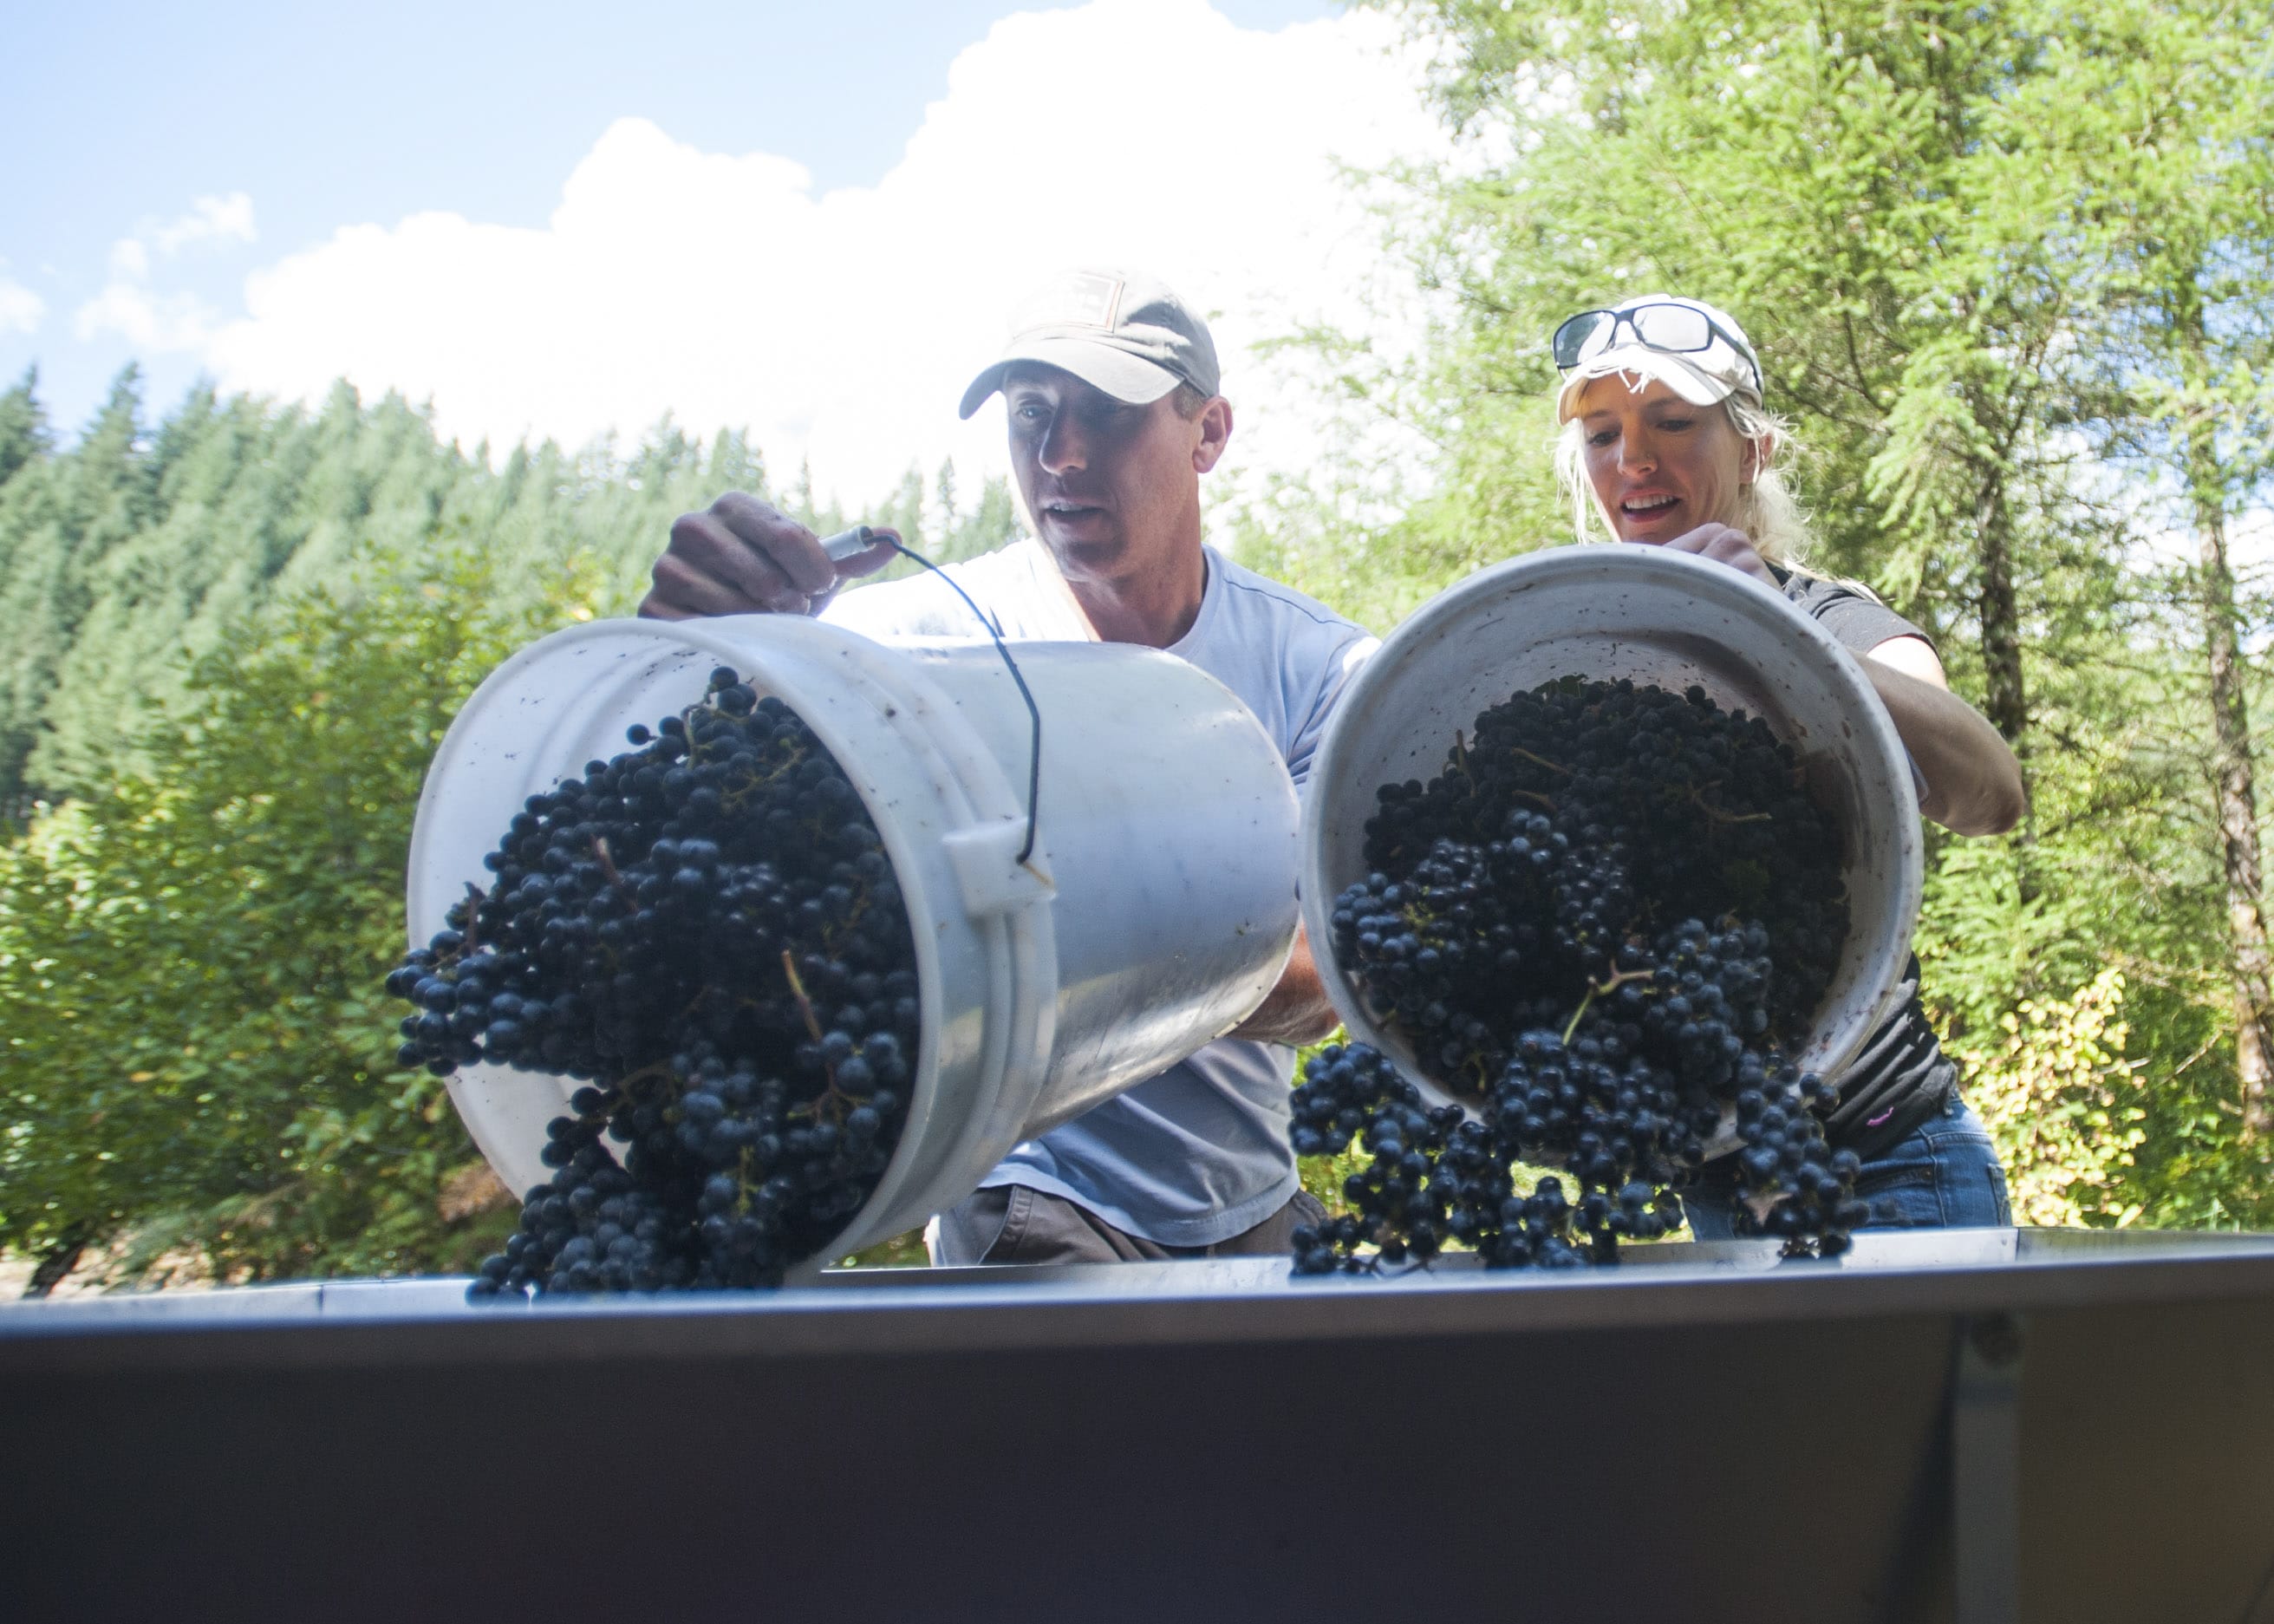 Winemaker Dan Brink, left, and Destiny Fuller throw buckets of grapes in to a crushing and de-stemming machine at Pomeroy Cellars in Yacolt on Sept. 2. The grapes, which were sourced from Eastern Washington, will be made in to a merlot wine.